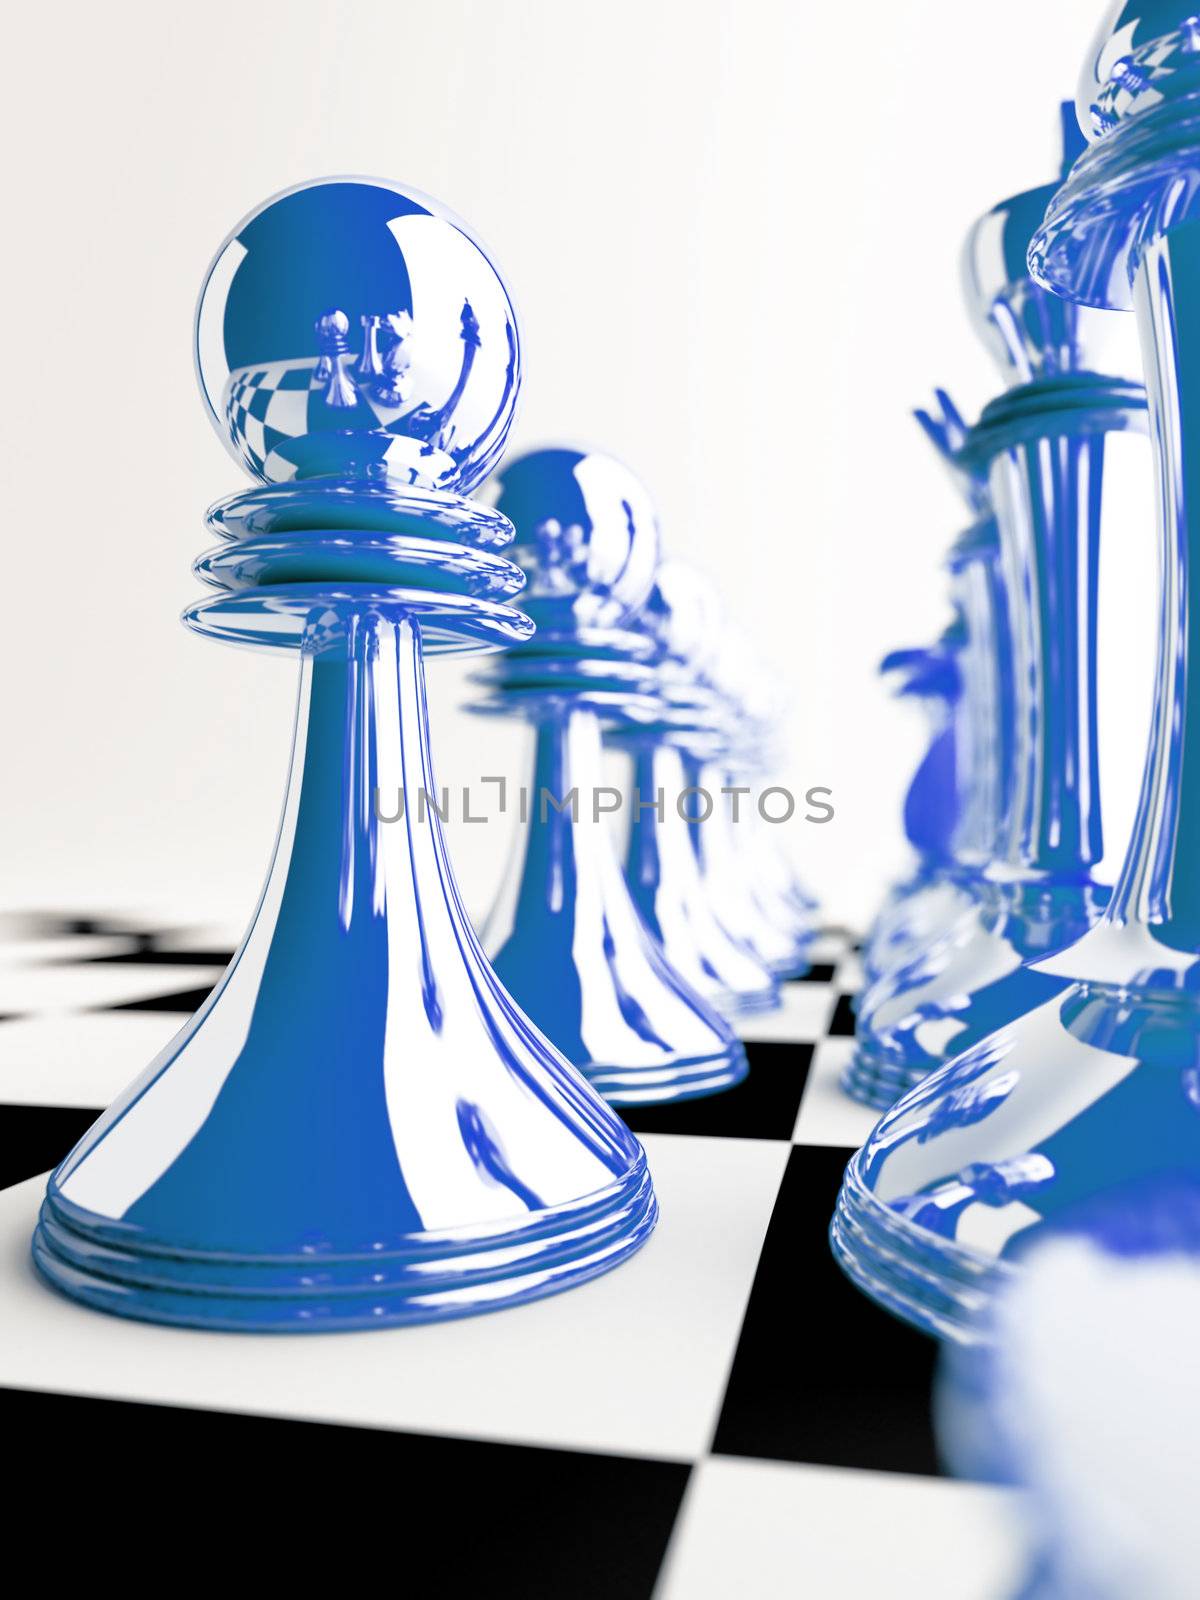 chessmen of blue color on checkered board